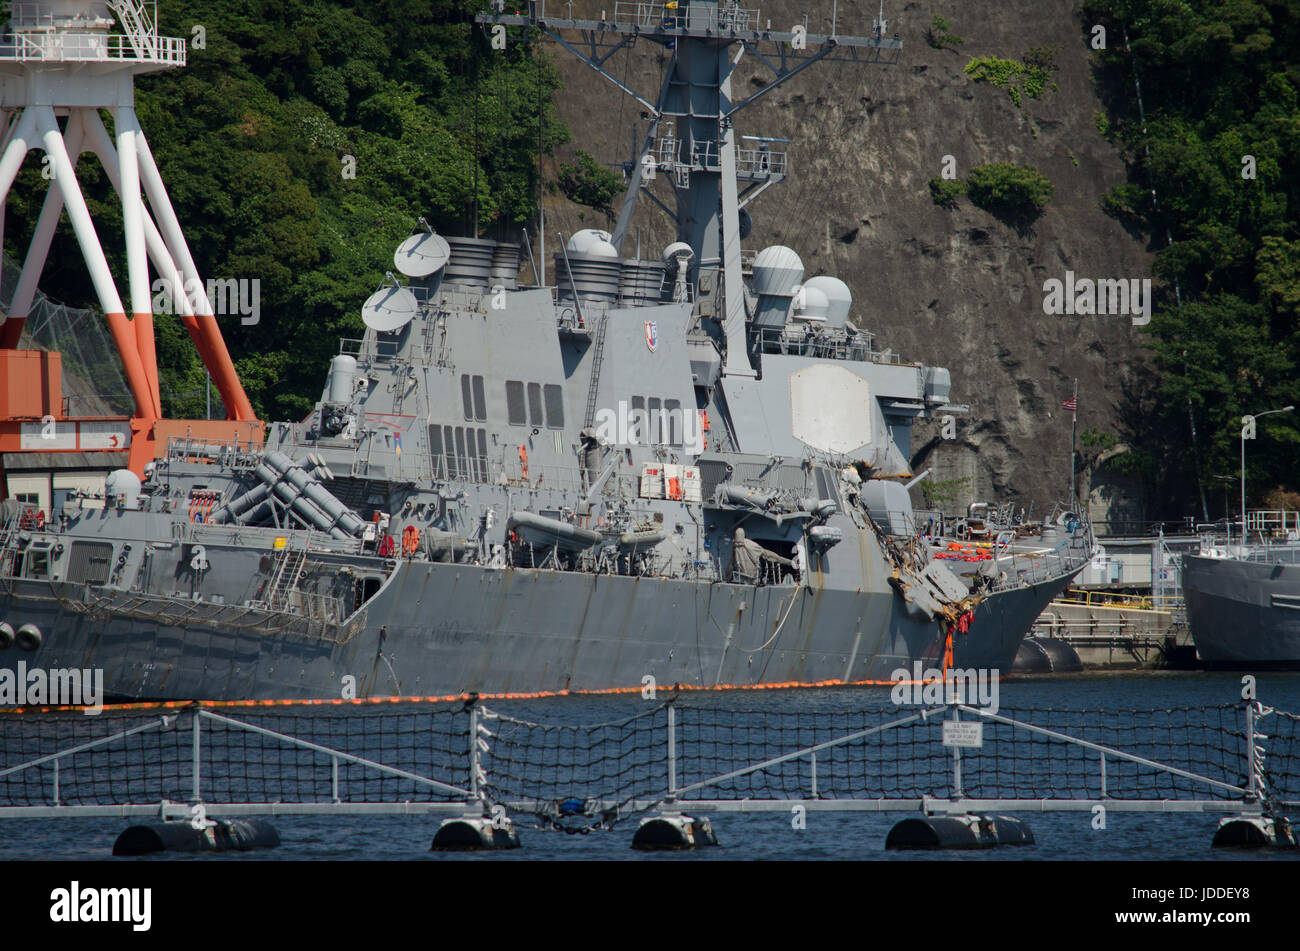 Yokosuka, Japan. 19th June, 2017. Kanagawa Prefecture - USS Fitzgerald (DD-62) Destroyer can be seen at Yokosuka Naval Base days after it collided with a container ship off the coast of Japan. Photo taken on Monday, June 20, 2017. Photo by: Ramiro Agustin Vargas Tabares Credit: Credit: /ZUMA Wire/Alamy Live News Stock Photo